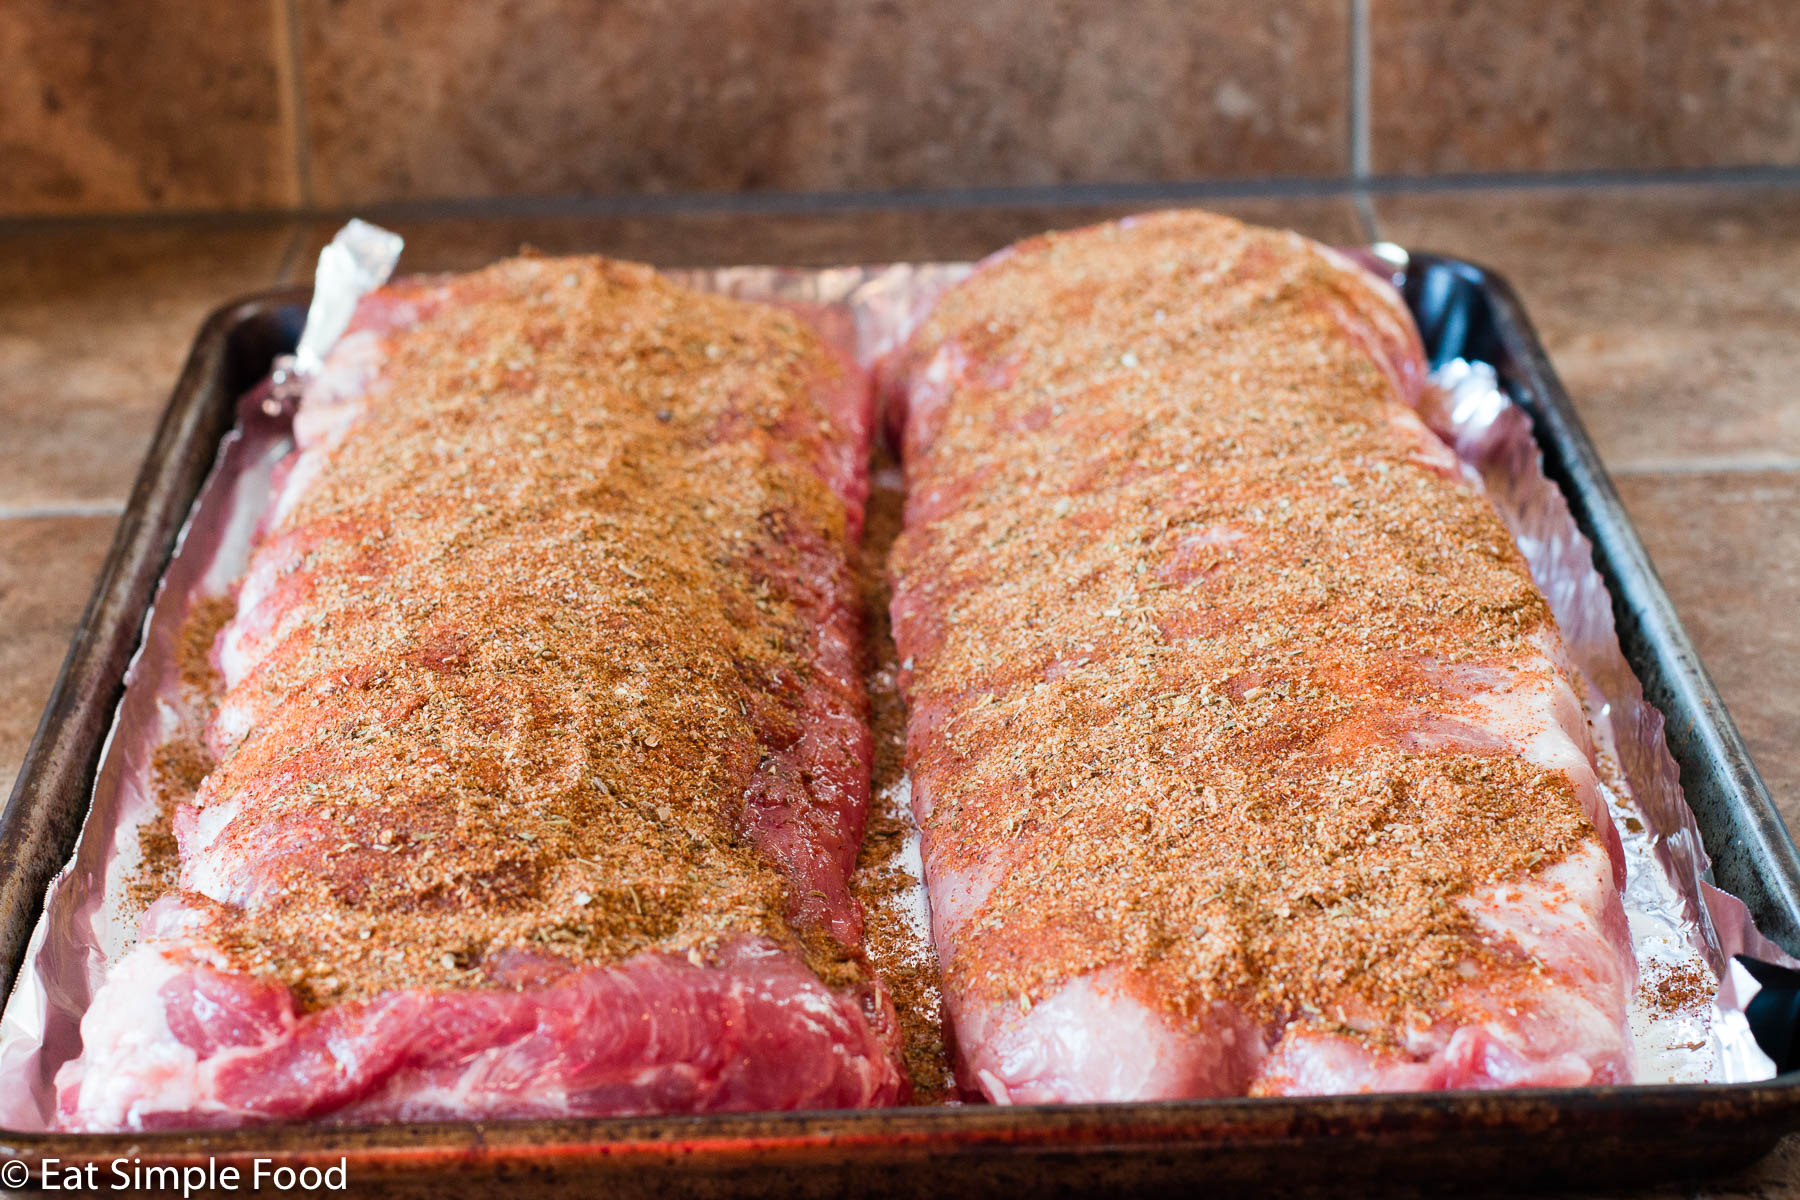 2 racks of baby back ribs on a sheet pan lined with aluminum foil with spices rubbed on the top.